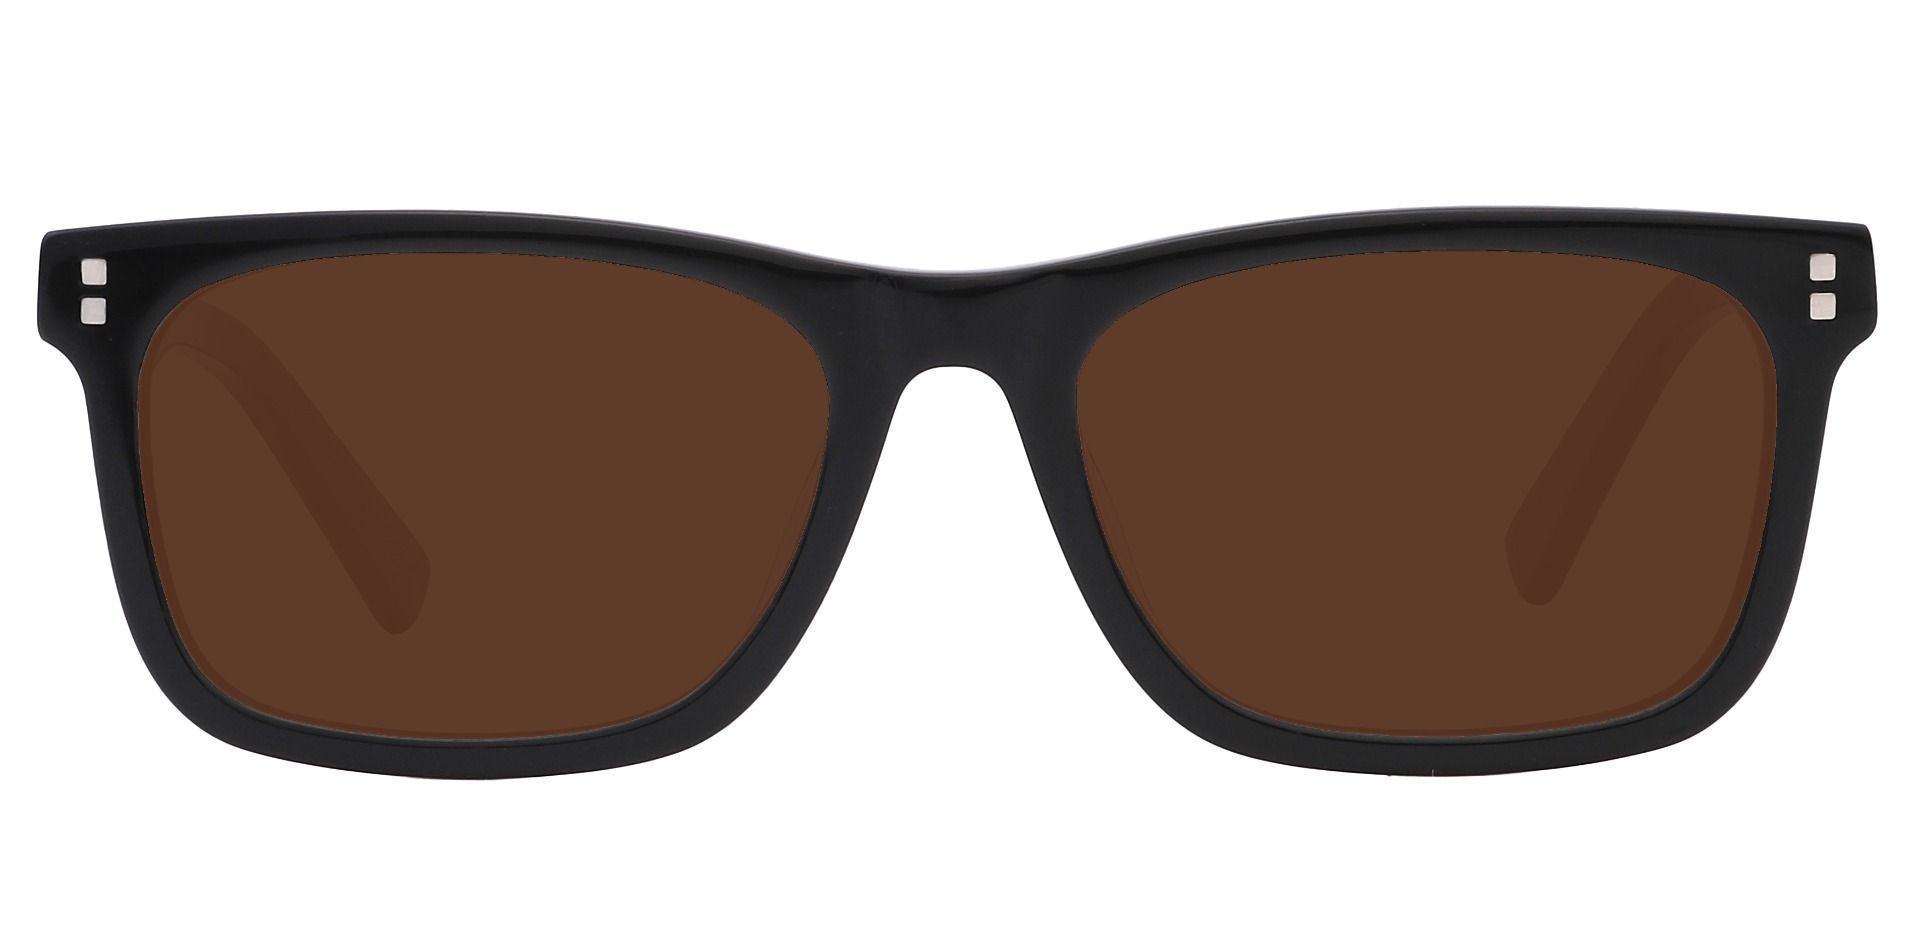 Liberty Rectangle Reading Sunglasses - Black Frame With Brown Lenses